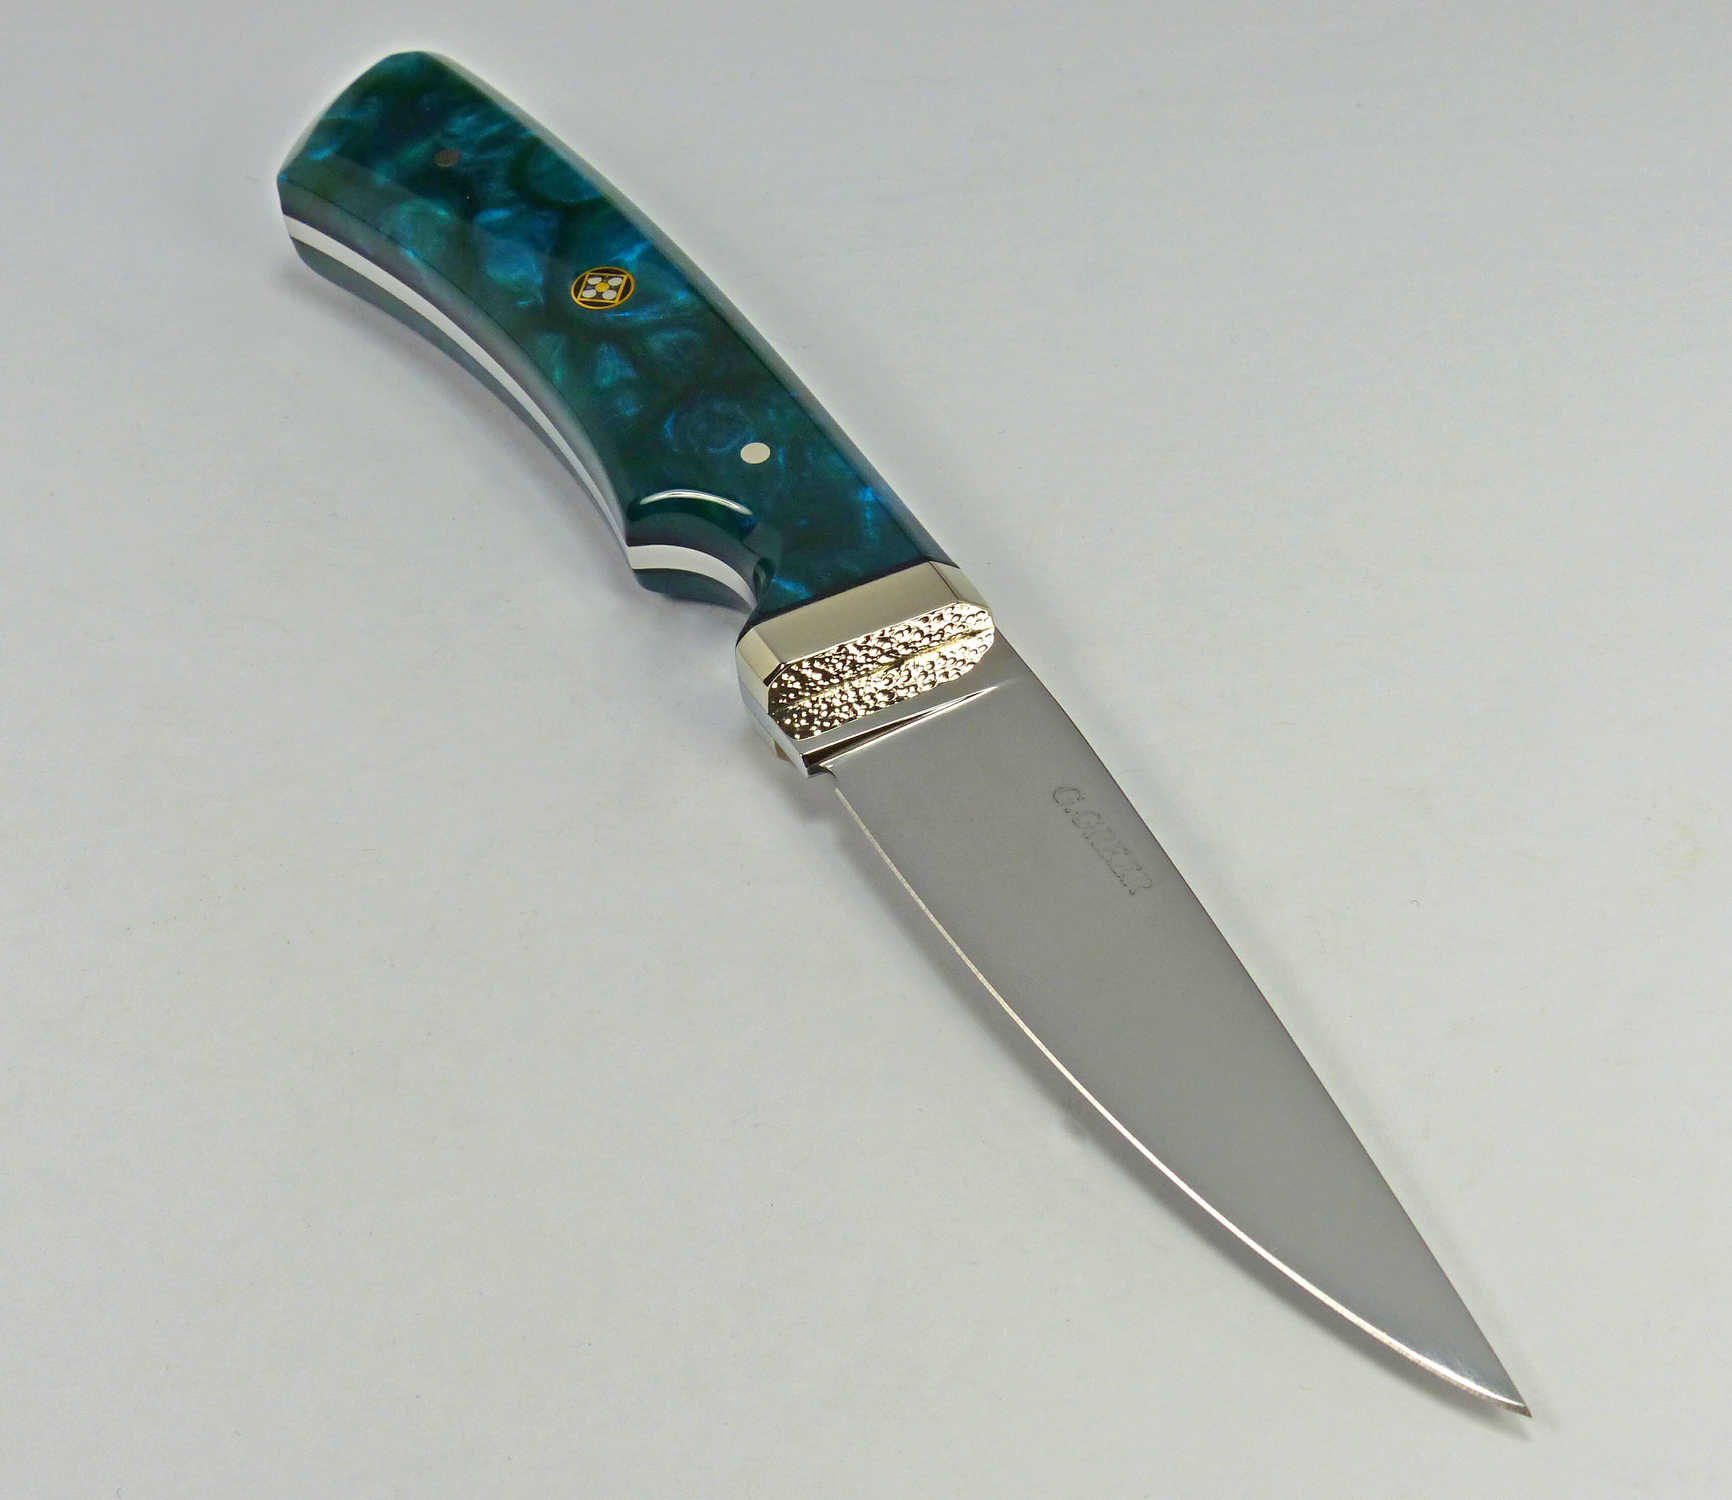 Art knife with blue pearlescent handle and dimpled guard